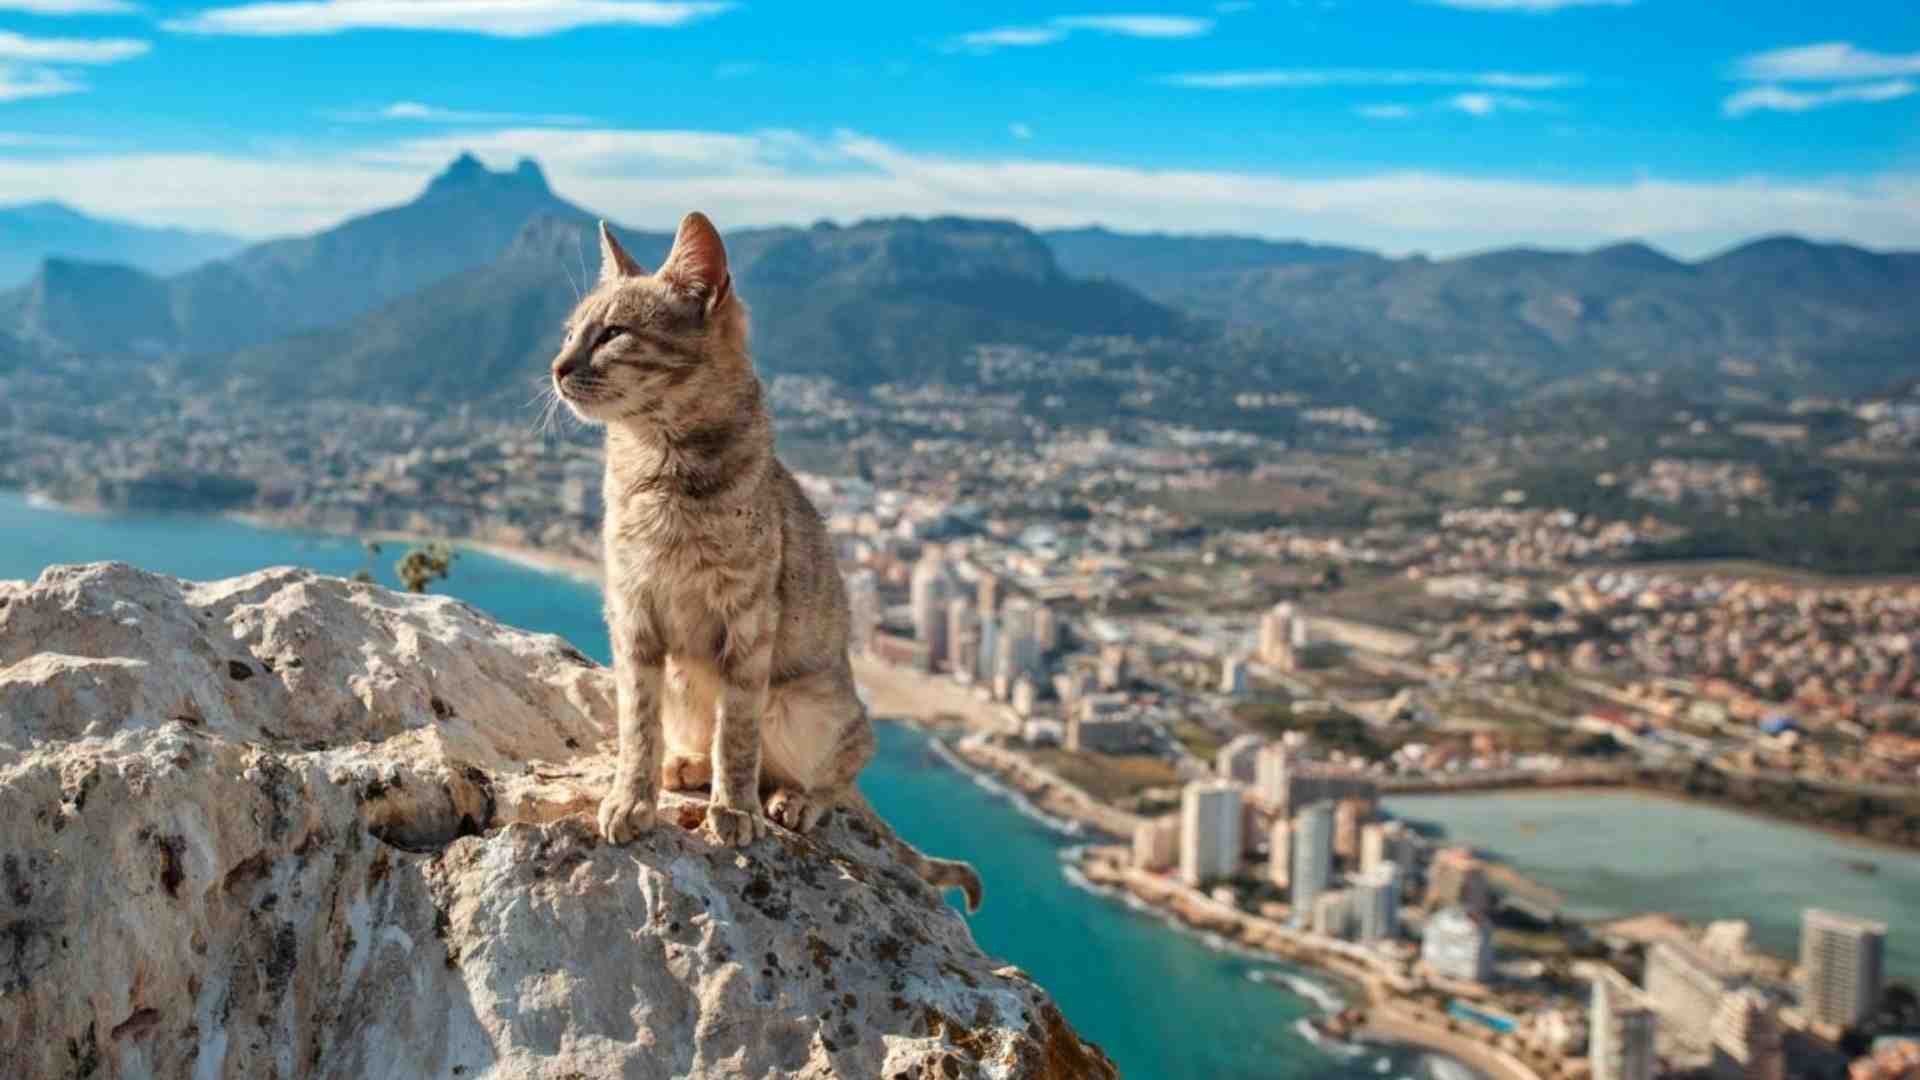 Cat in an article about ways to attract customers